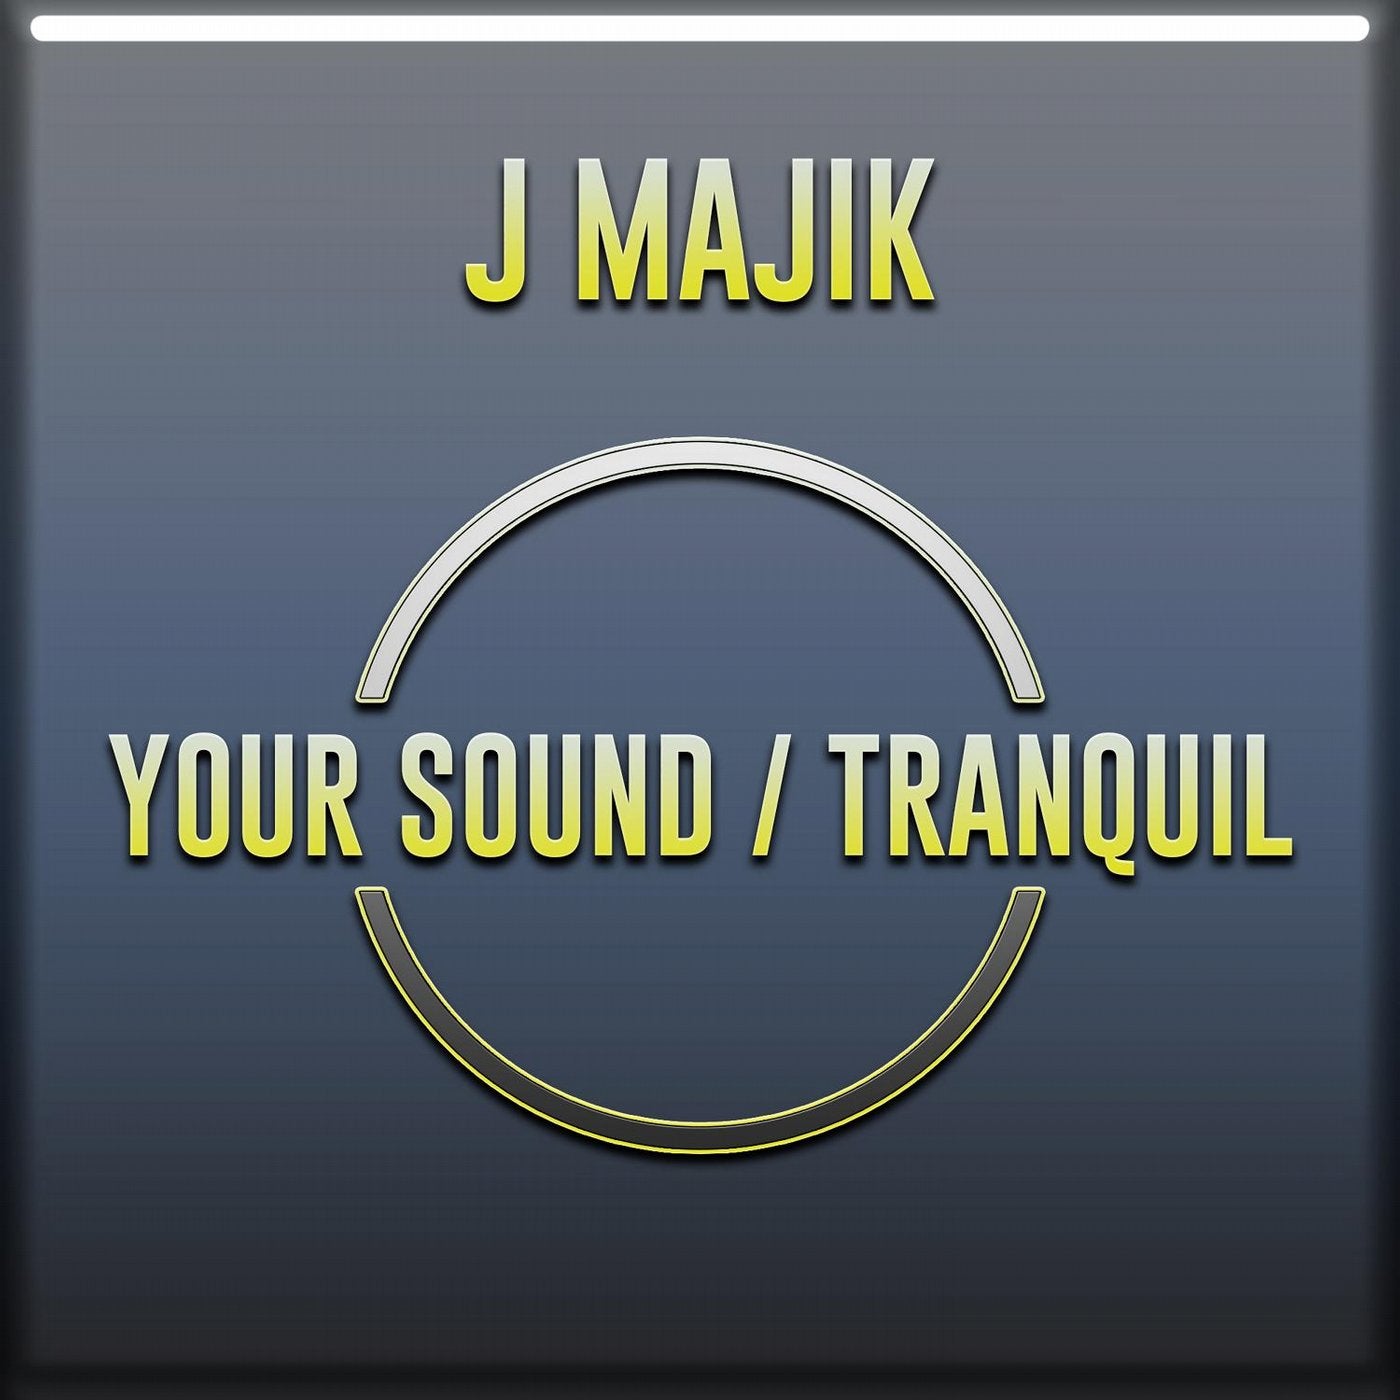 Your Sound / Tranquil